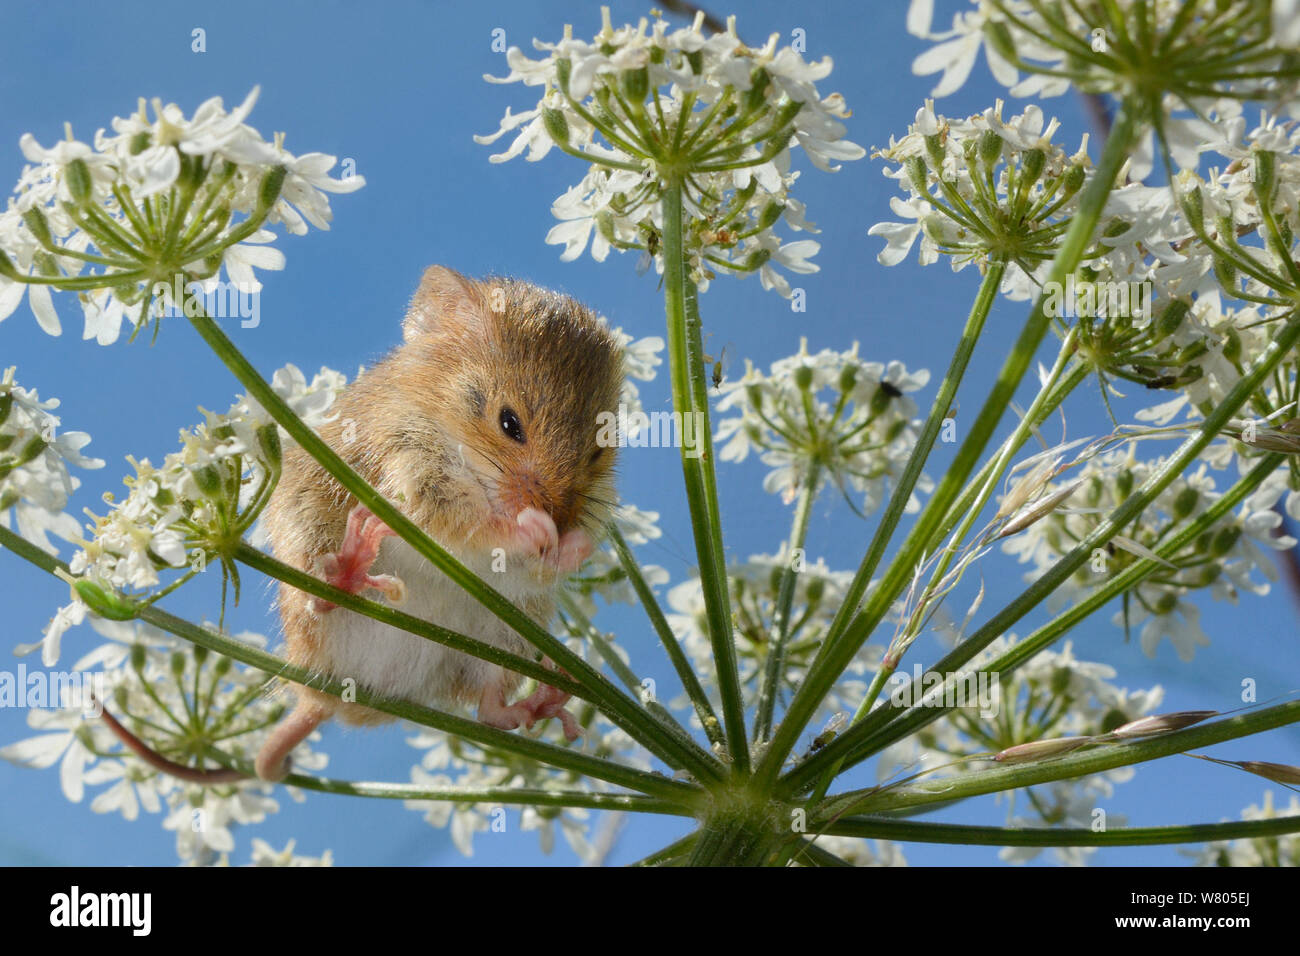 Harvest mouse (Micromys minutus) cleaning its nose on Common hogweed (Heracleum sphondylium) flowerhead after release, Moulton, Northampton, UK, June.  Model released. Stock Photo